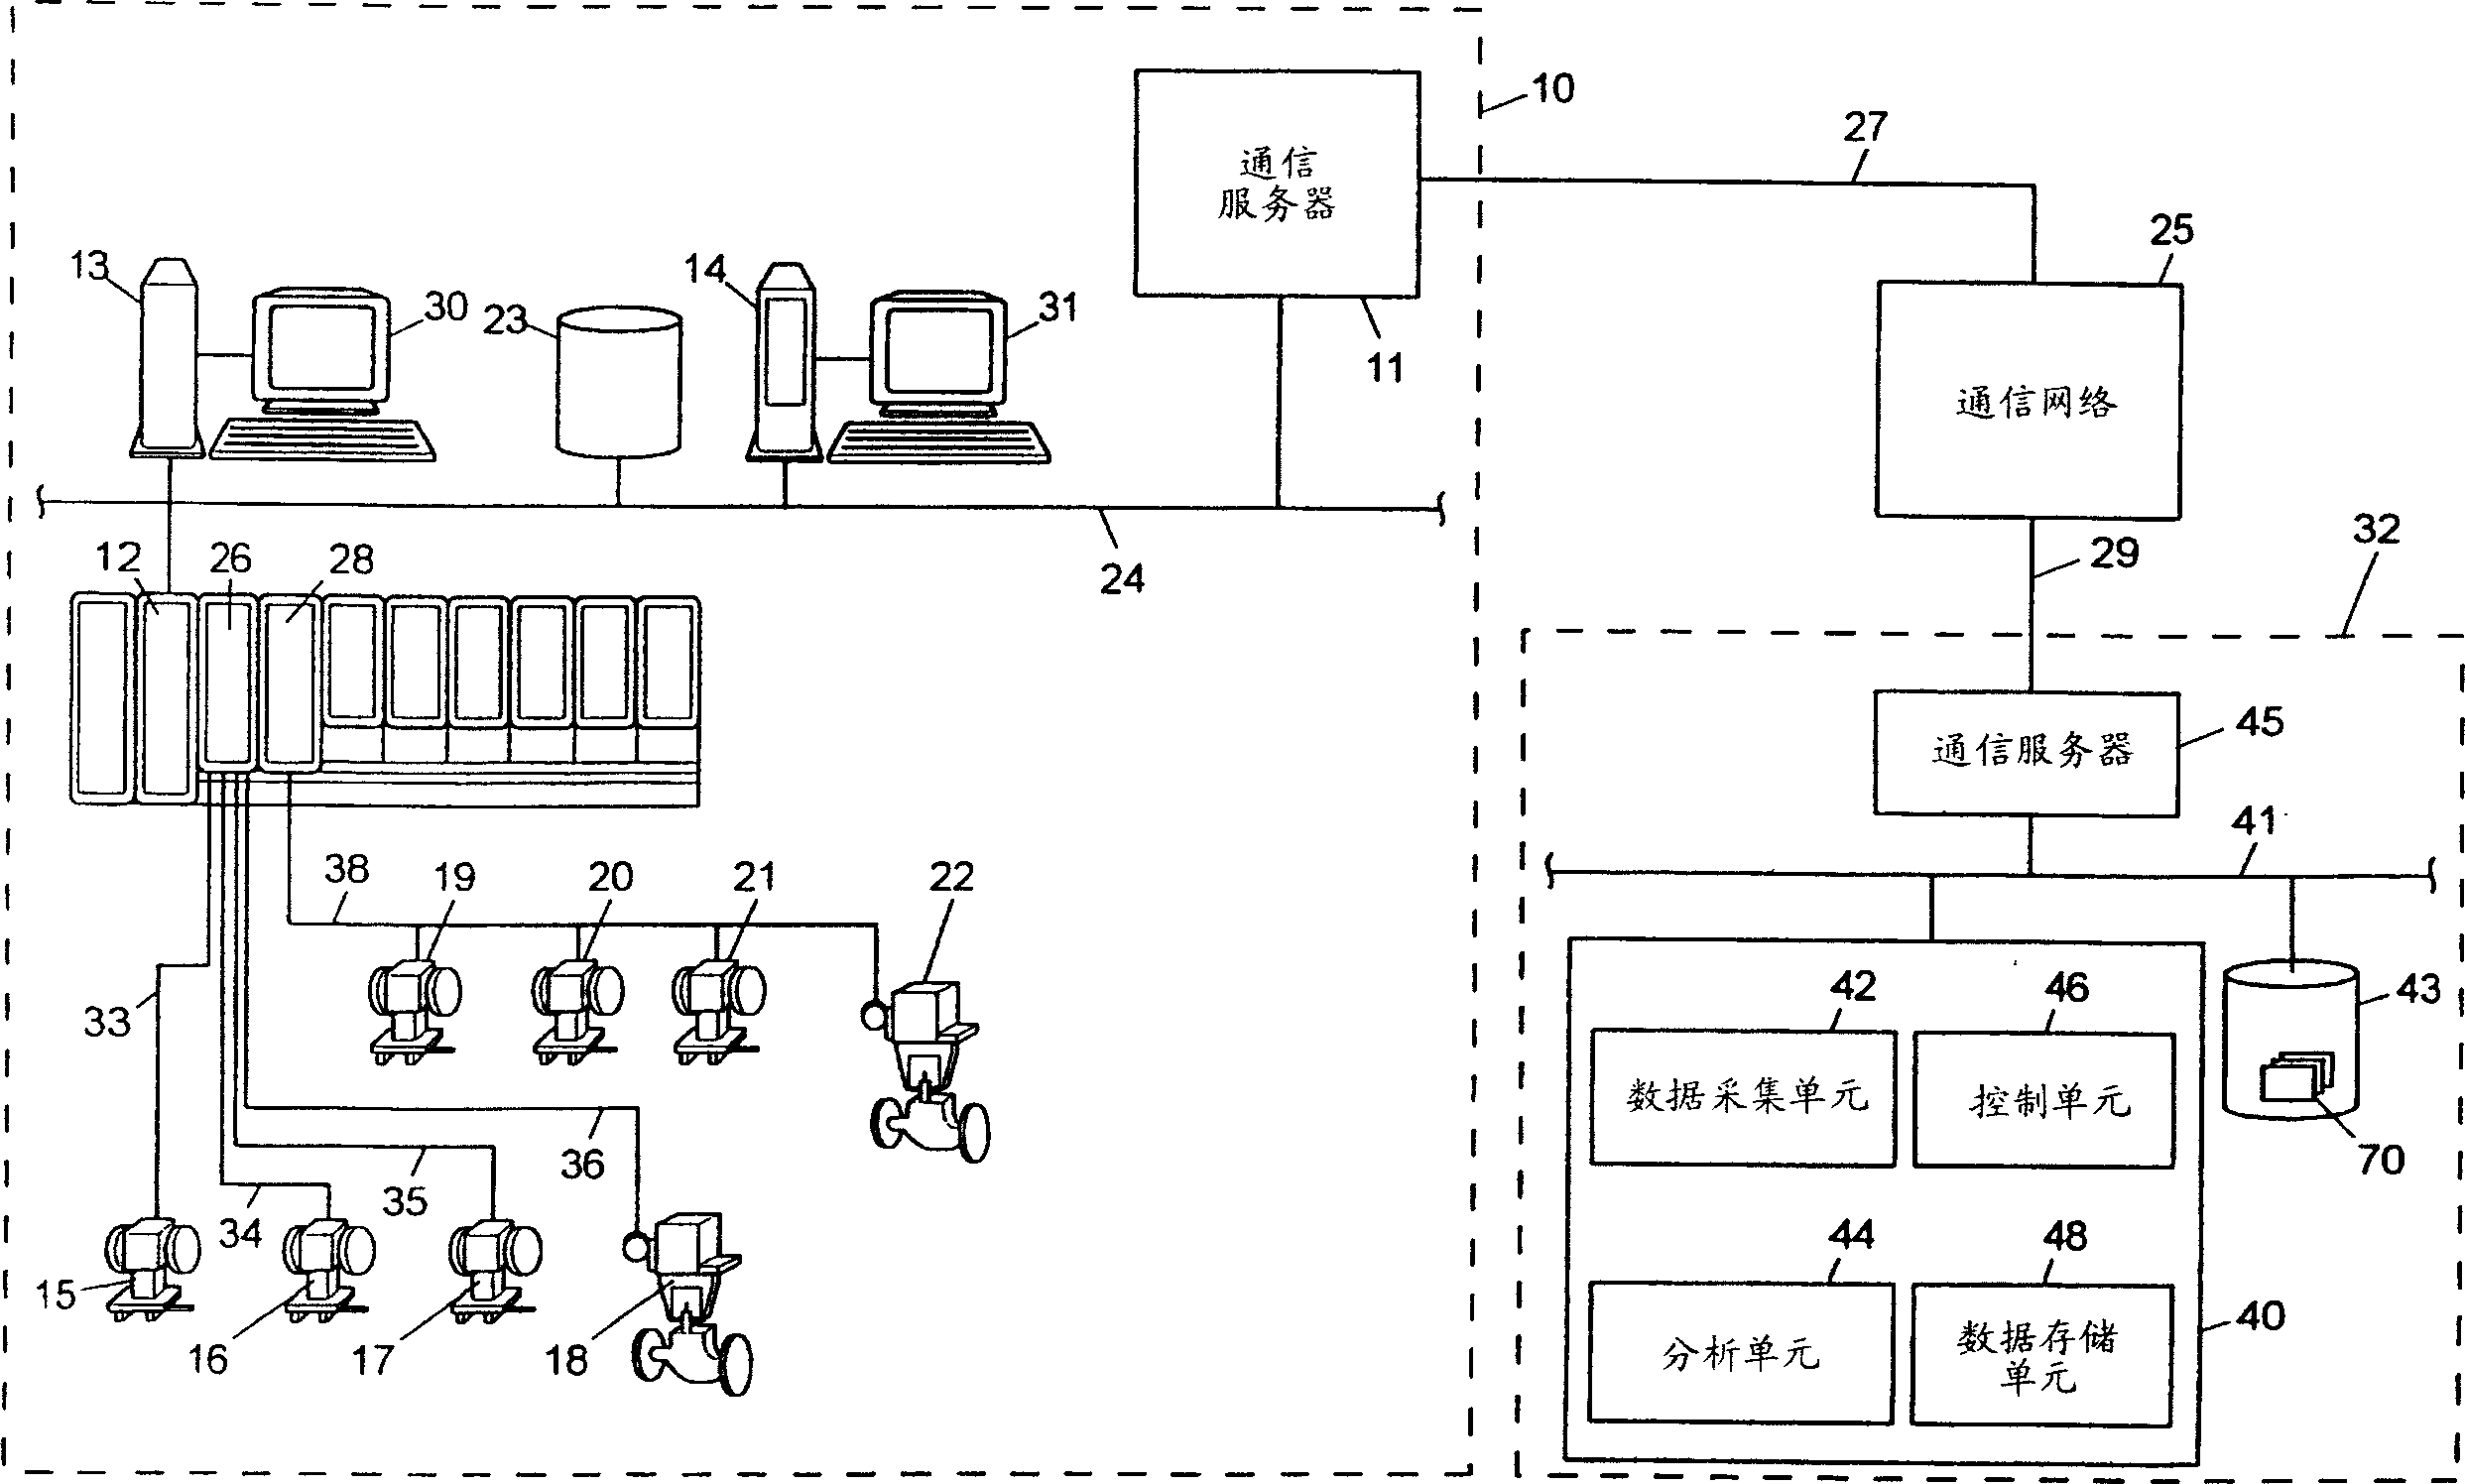 Service facility for providing remote diagnostic and maintenance services to a process plant